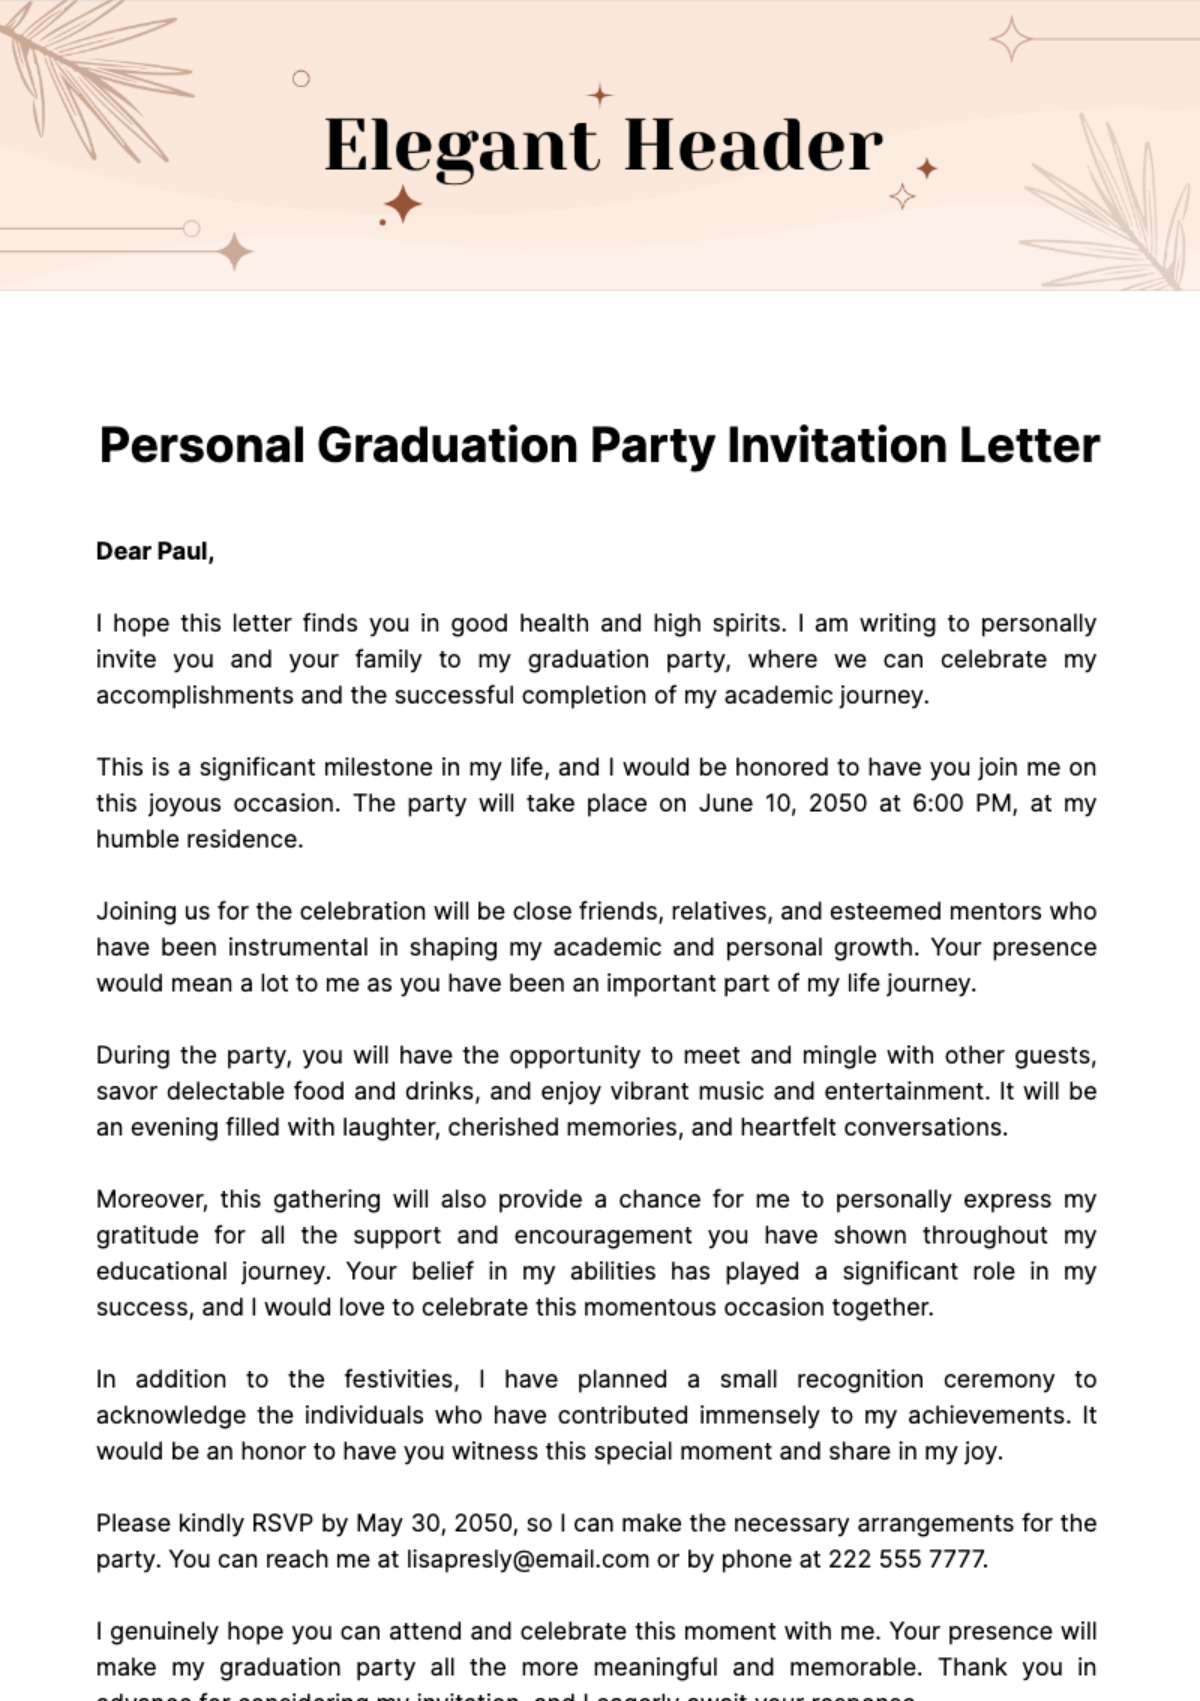 Free Personal Graduation Party Invitation Letter Template